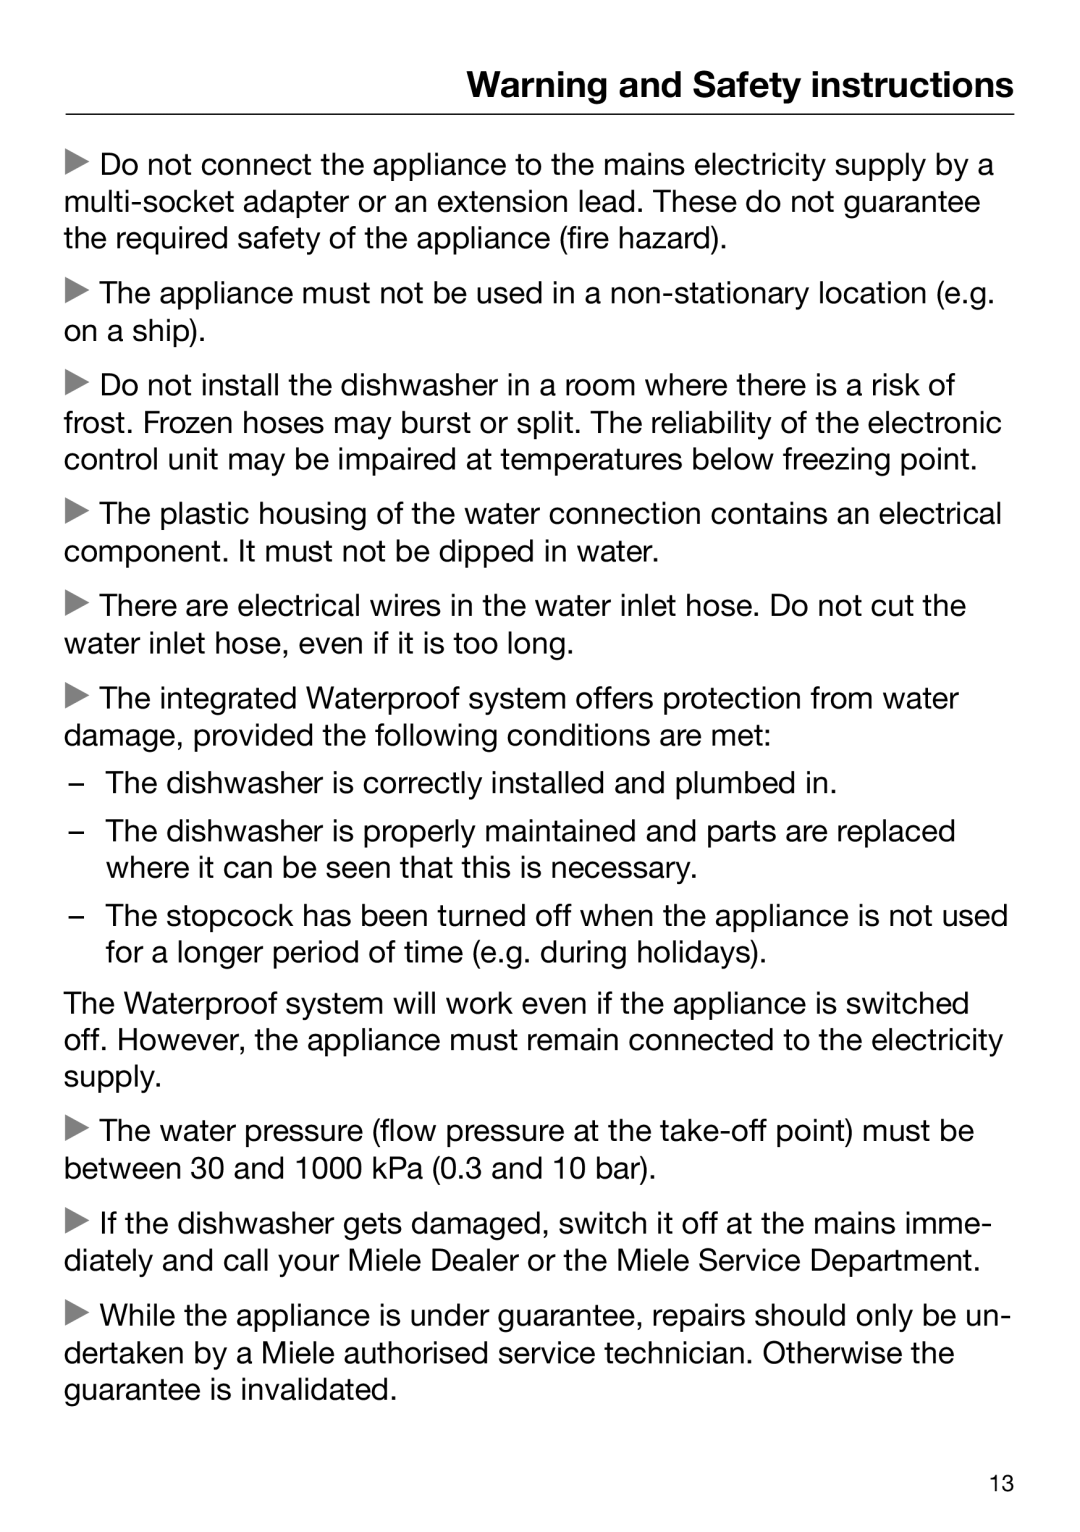 Miele 09 645 470 manual Warning and Safety instructions, The dishwasher is correctly installed and plumbed in 